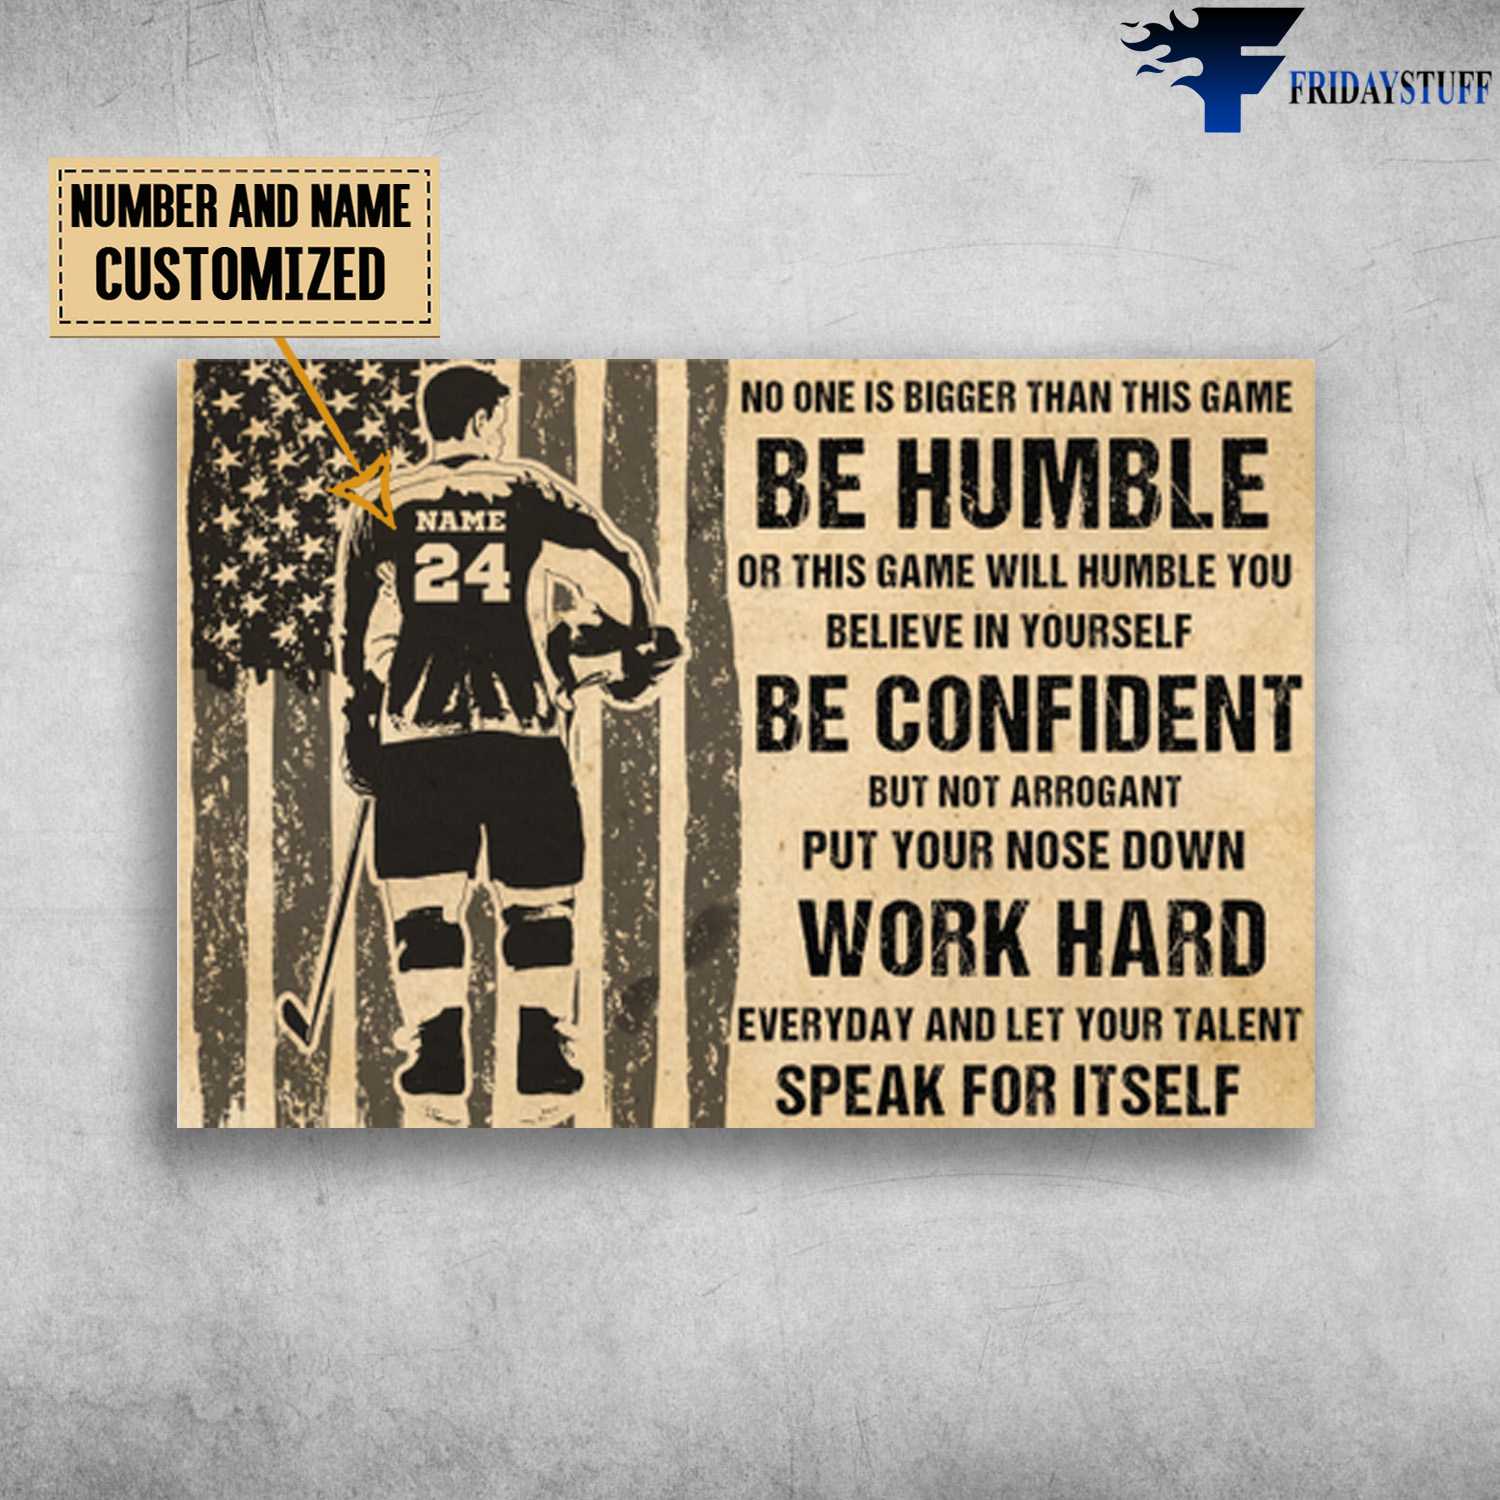 Hockey Player, American Hokey, No One Is Bigger Than This Game, Be Humble Or This Game Will Humble You, Believe In Your Self, Be Confident, But Not Arrogant, Put Your Nose Down Work Hard